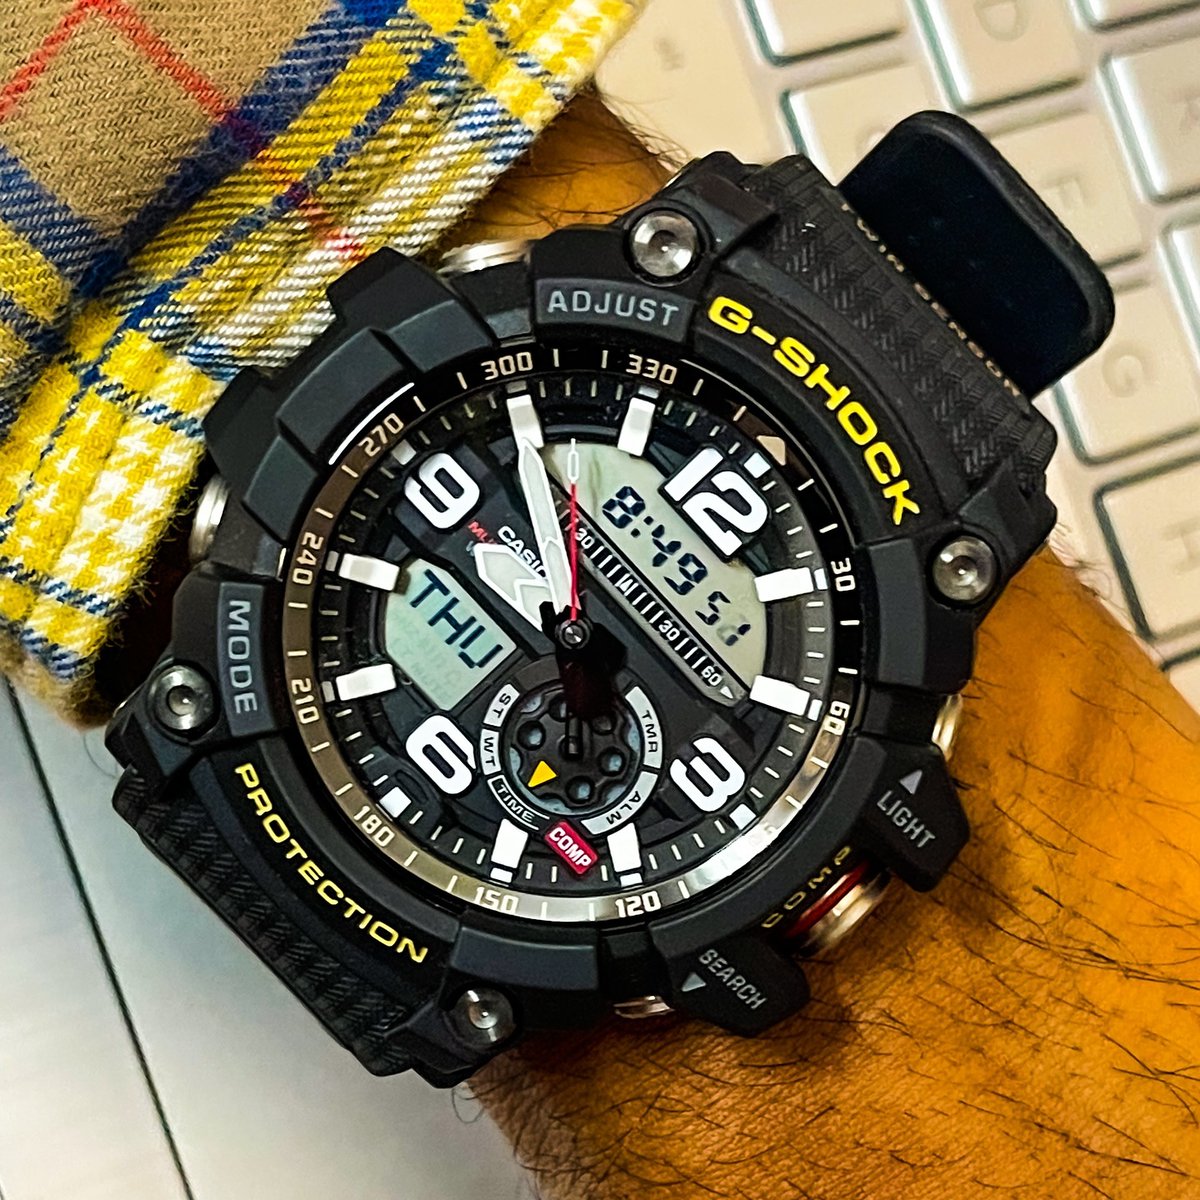 It’s #MUDMASTERMONDAY. 🔥

Drop us a 🚀 if you’re taking your timepiece to new heights this week. 

📸: @thewatchbunkerclub, @thegentlemanwatchlover, @watchamadoin on Instagram

 #GSHOCK #gshockwatch #MUDMASTER